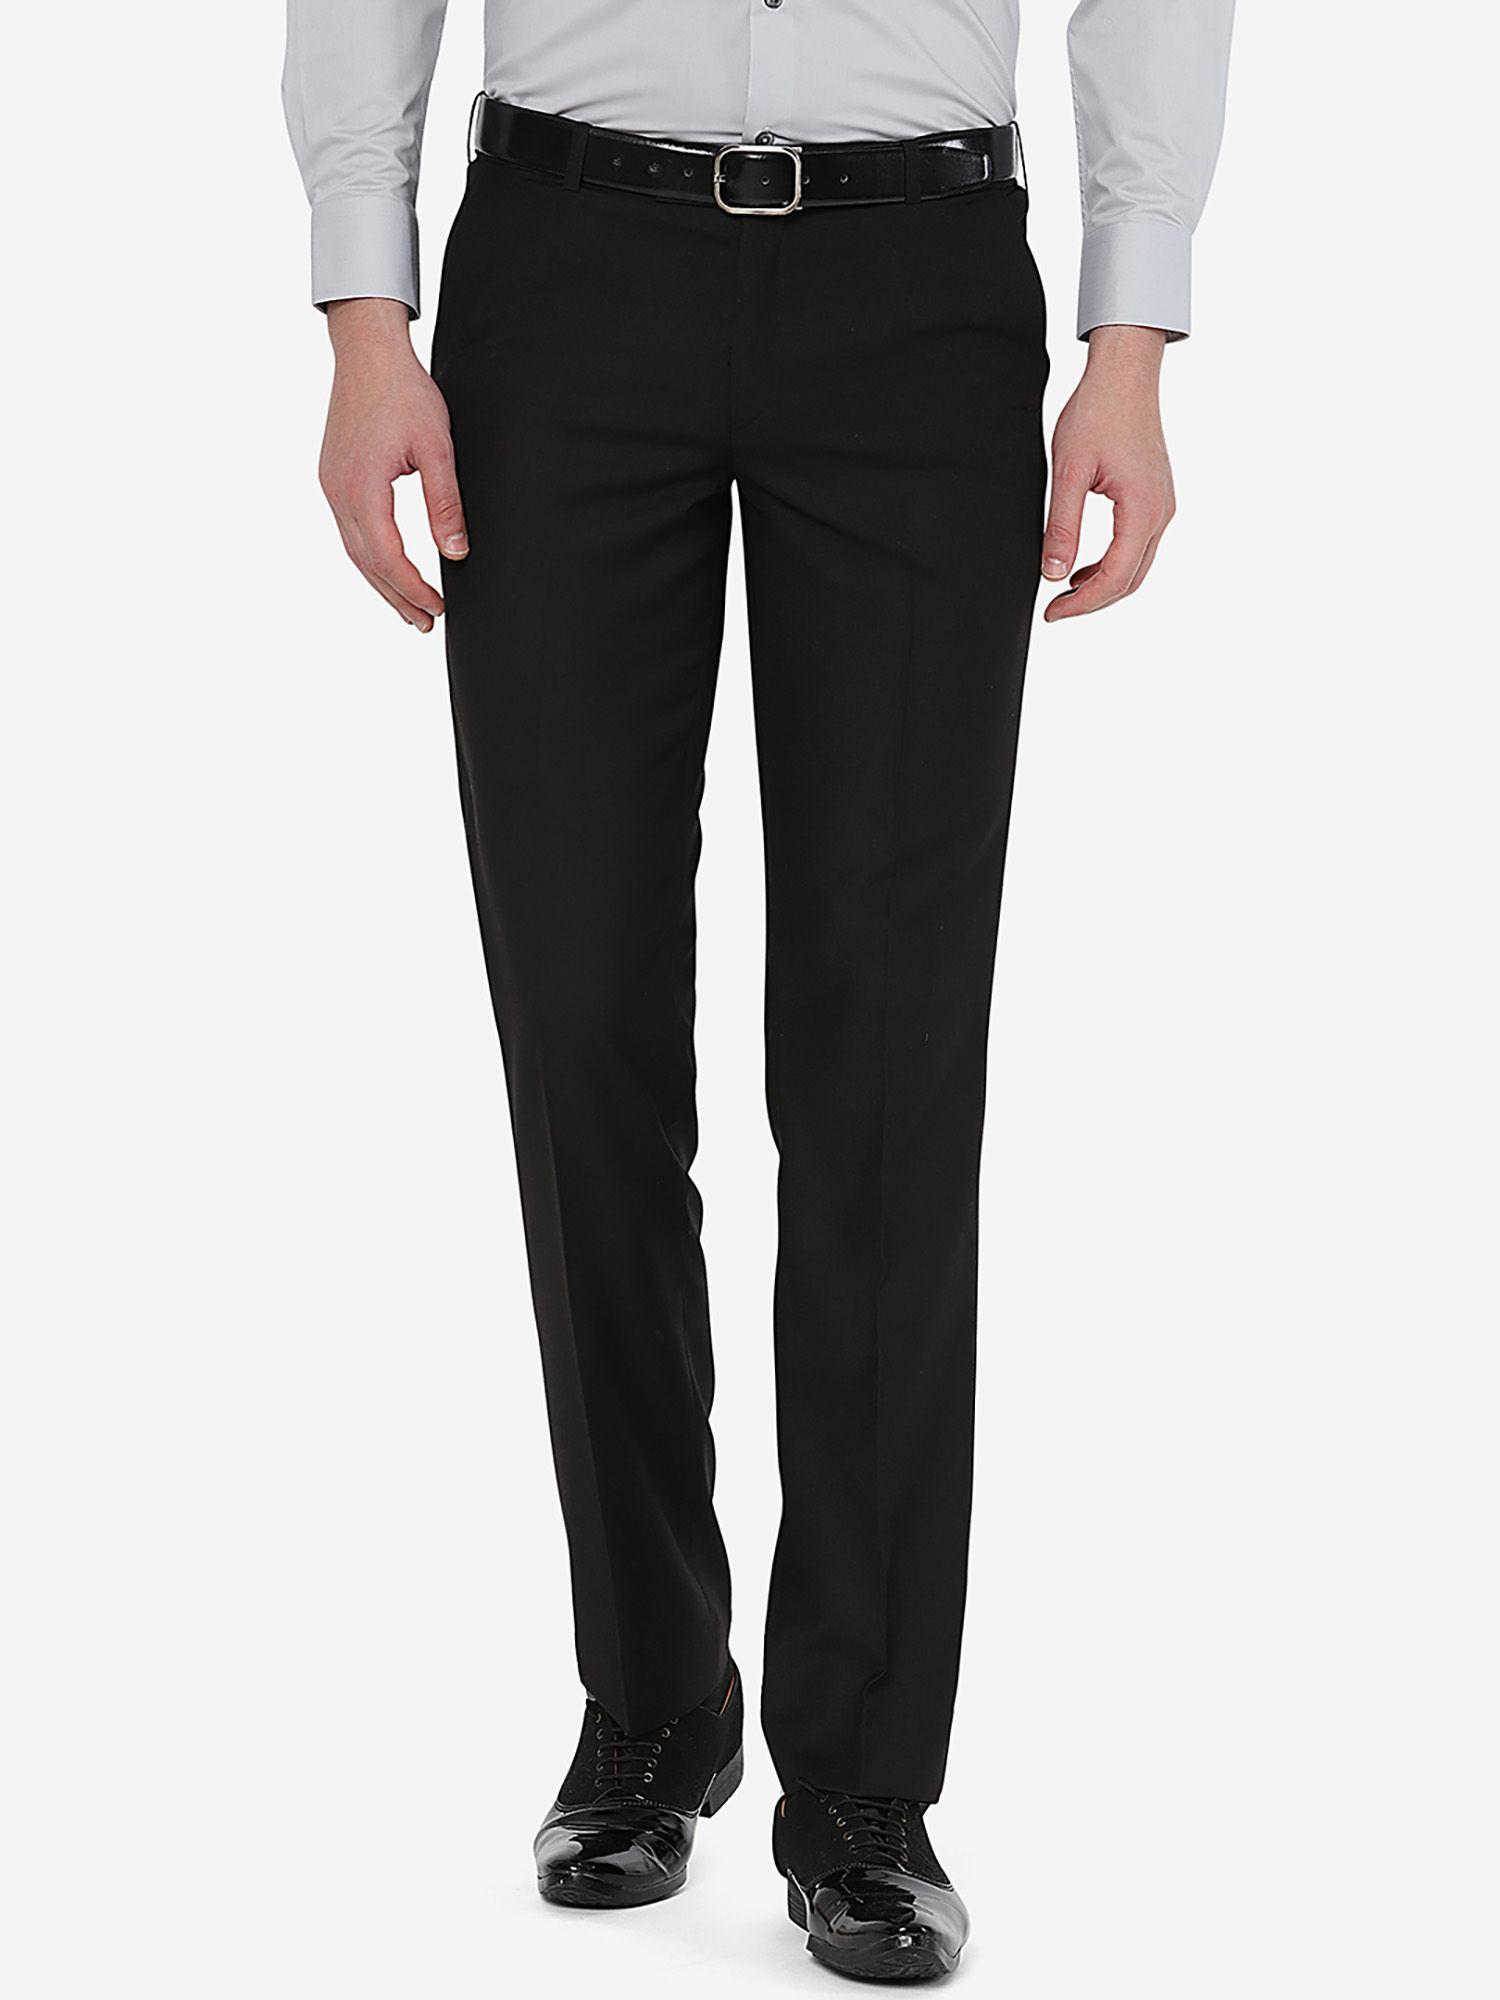 men's solid black terry rayon slim fit formal trouser